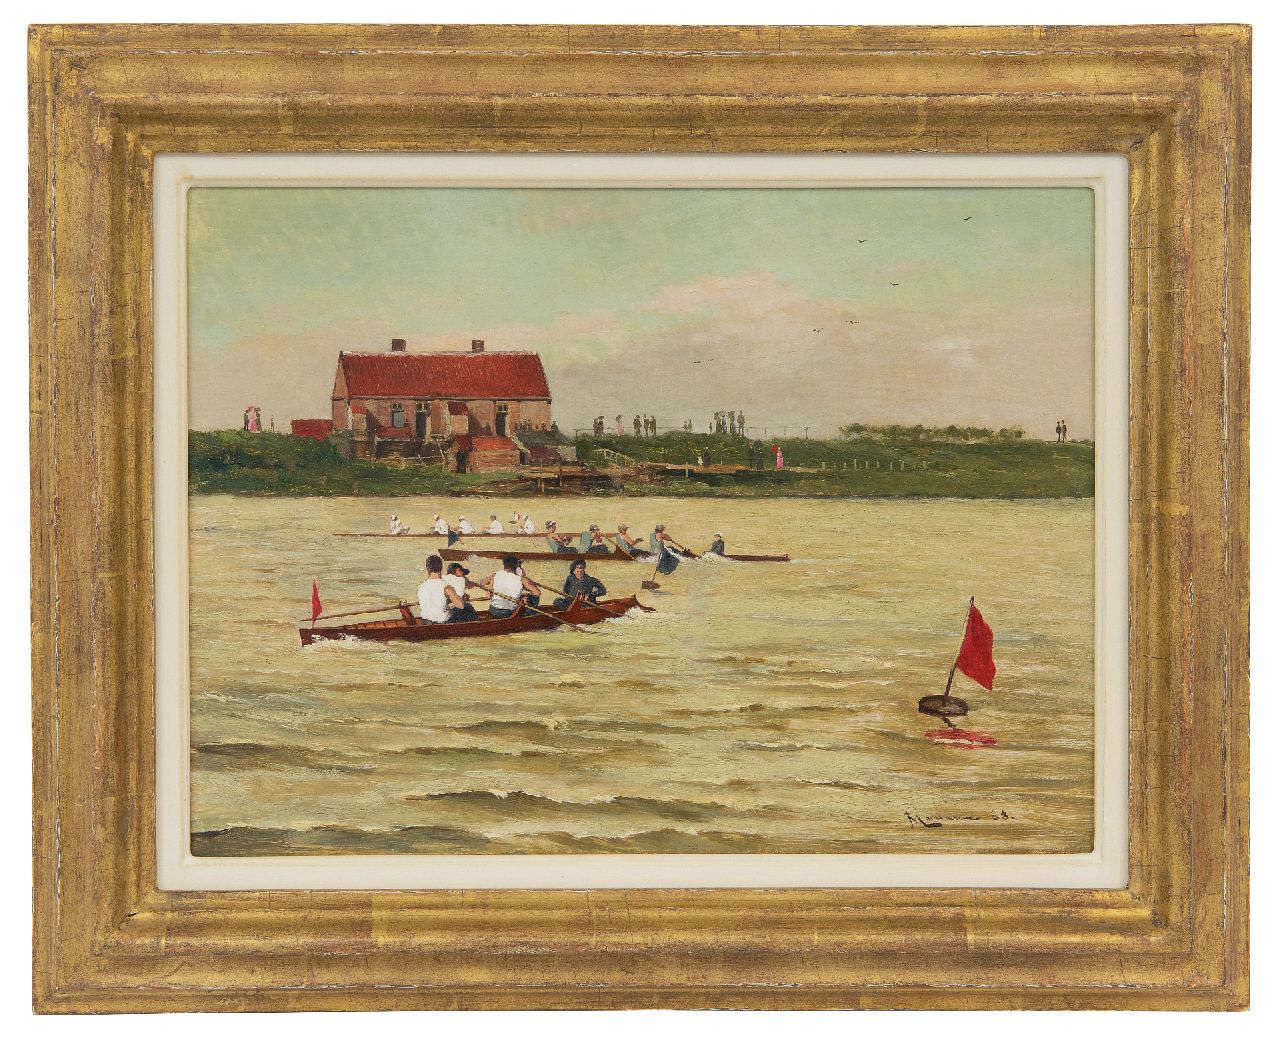 Moerman J.L.  | Johannes Lodewijk 'Jan Ludovicus' Moerman | Paintings offered for sale | Coxed four regatta, oil on panel 24.5 x 33.1 cm, signed l.r. and dated '88